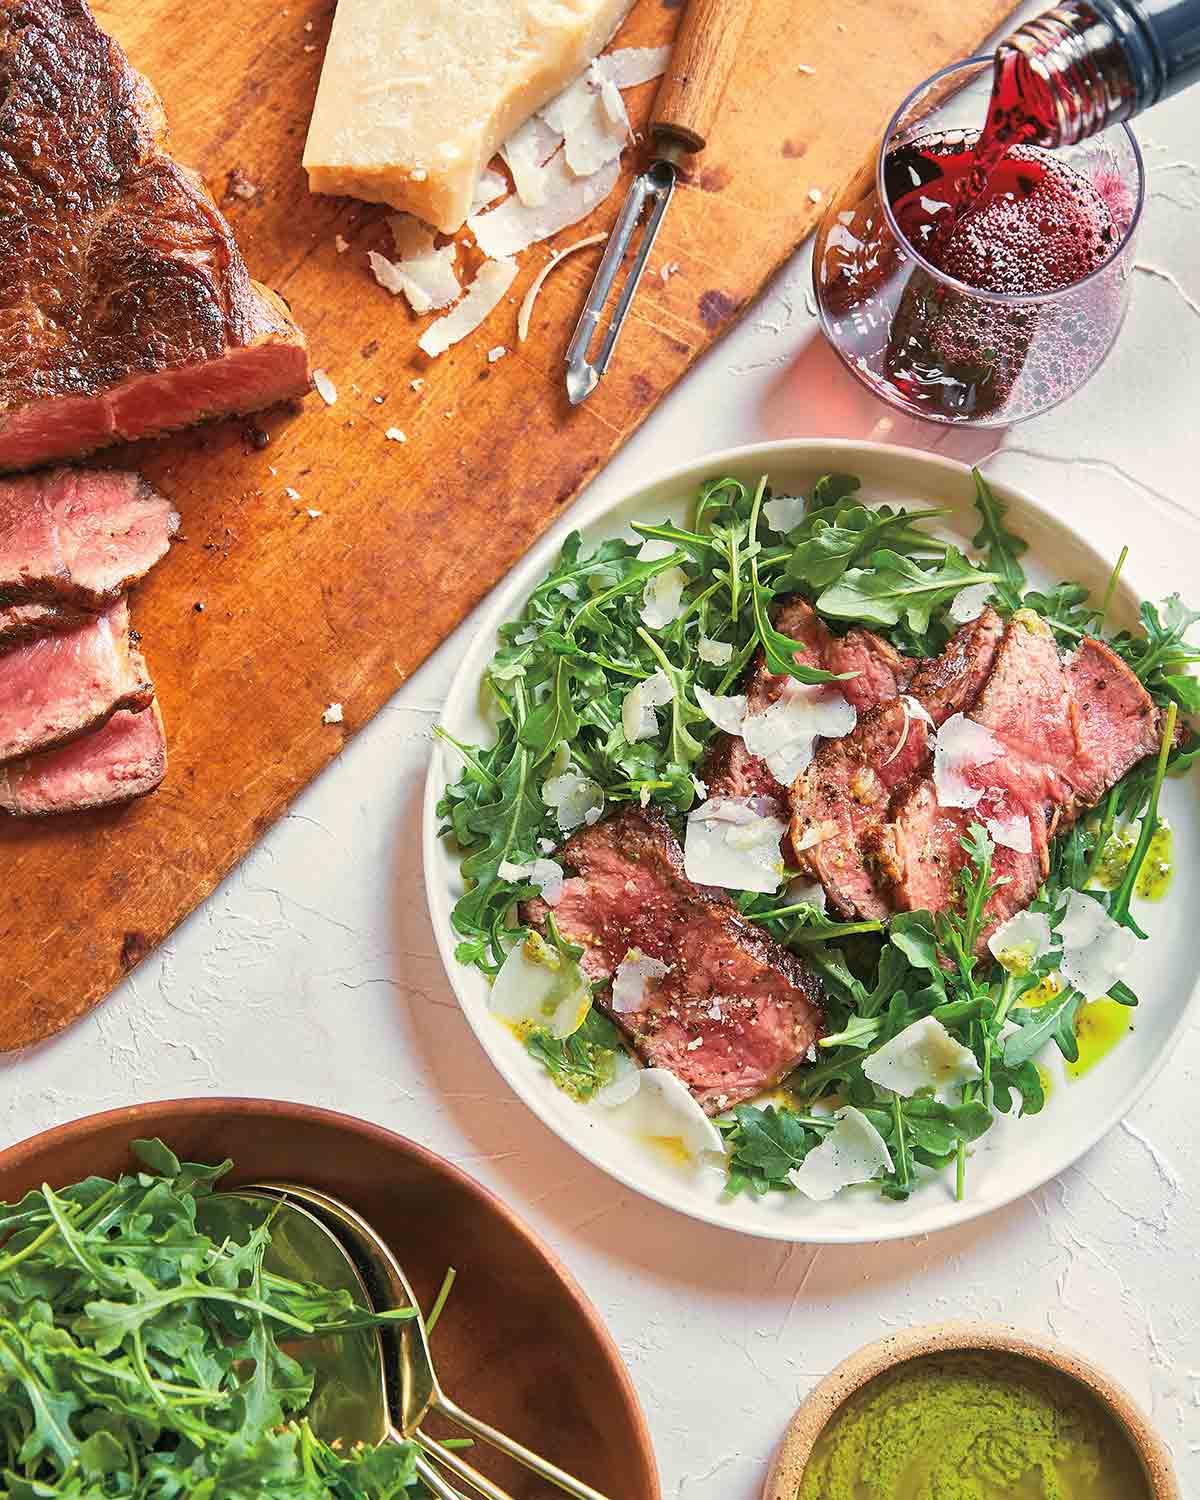 A steak and arugula salad with pesto vinaigrette in a white bowl, with a wooden board and sliced steak next to it.